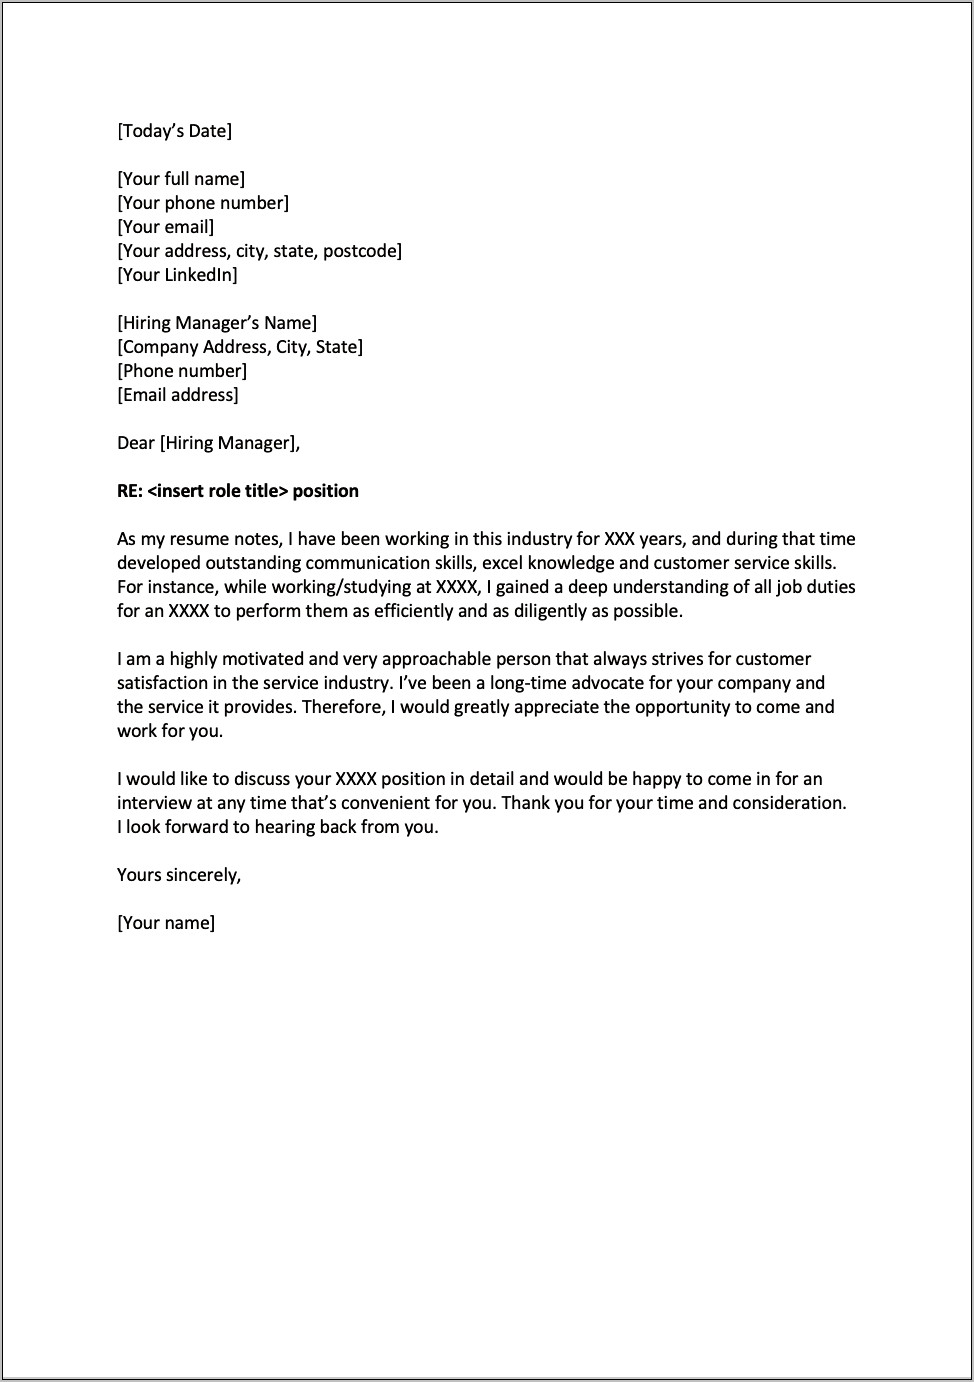 Resume Cover Letter Love An Opportunity Examples